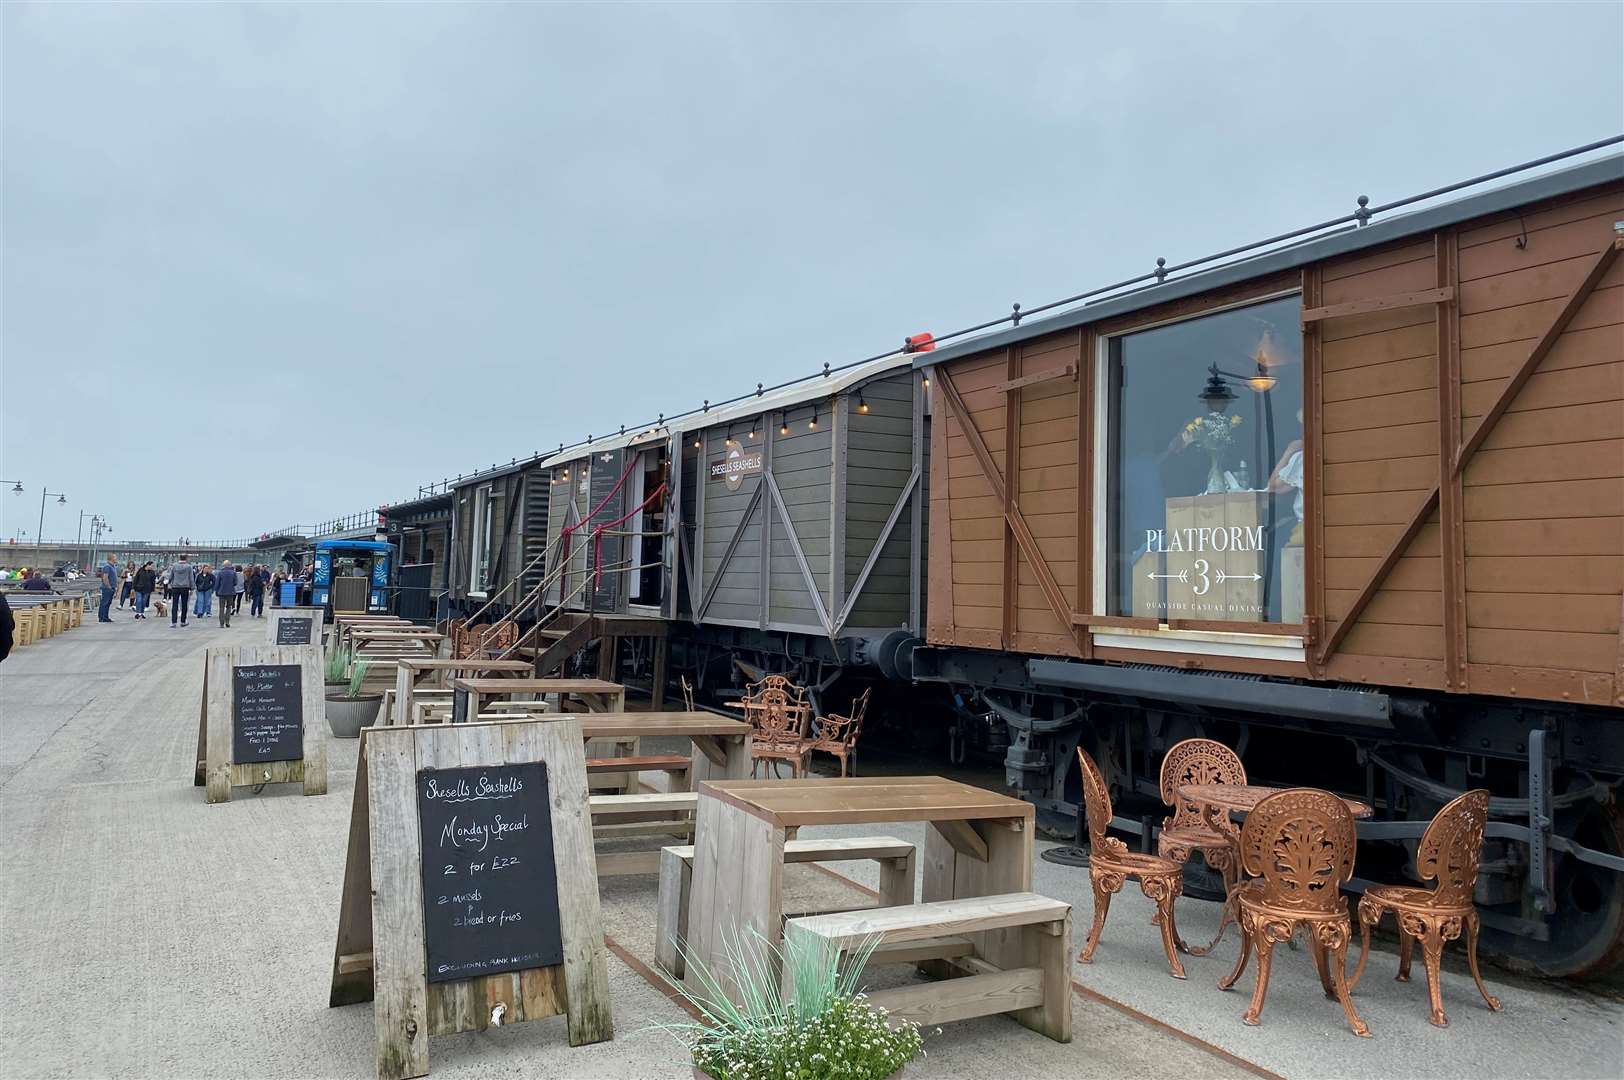 An applicant is proposing for more train carriages to be built on Folkestone's Harbour Arm